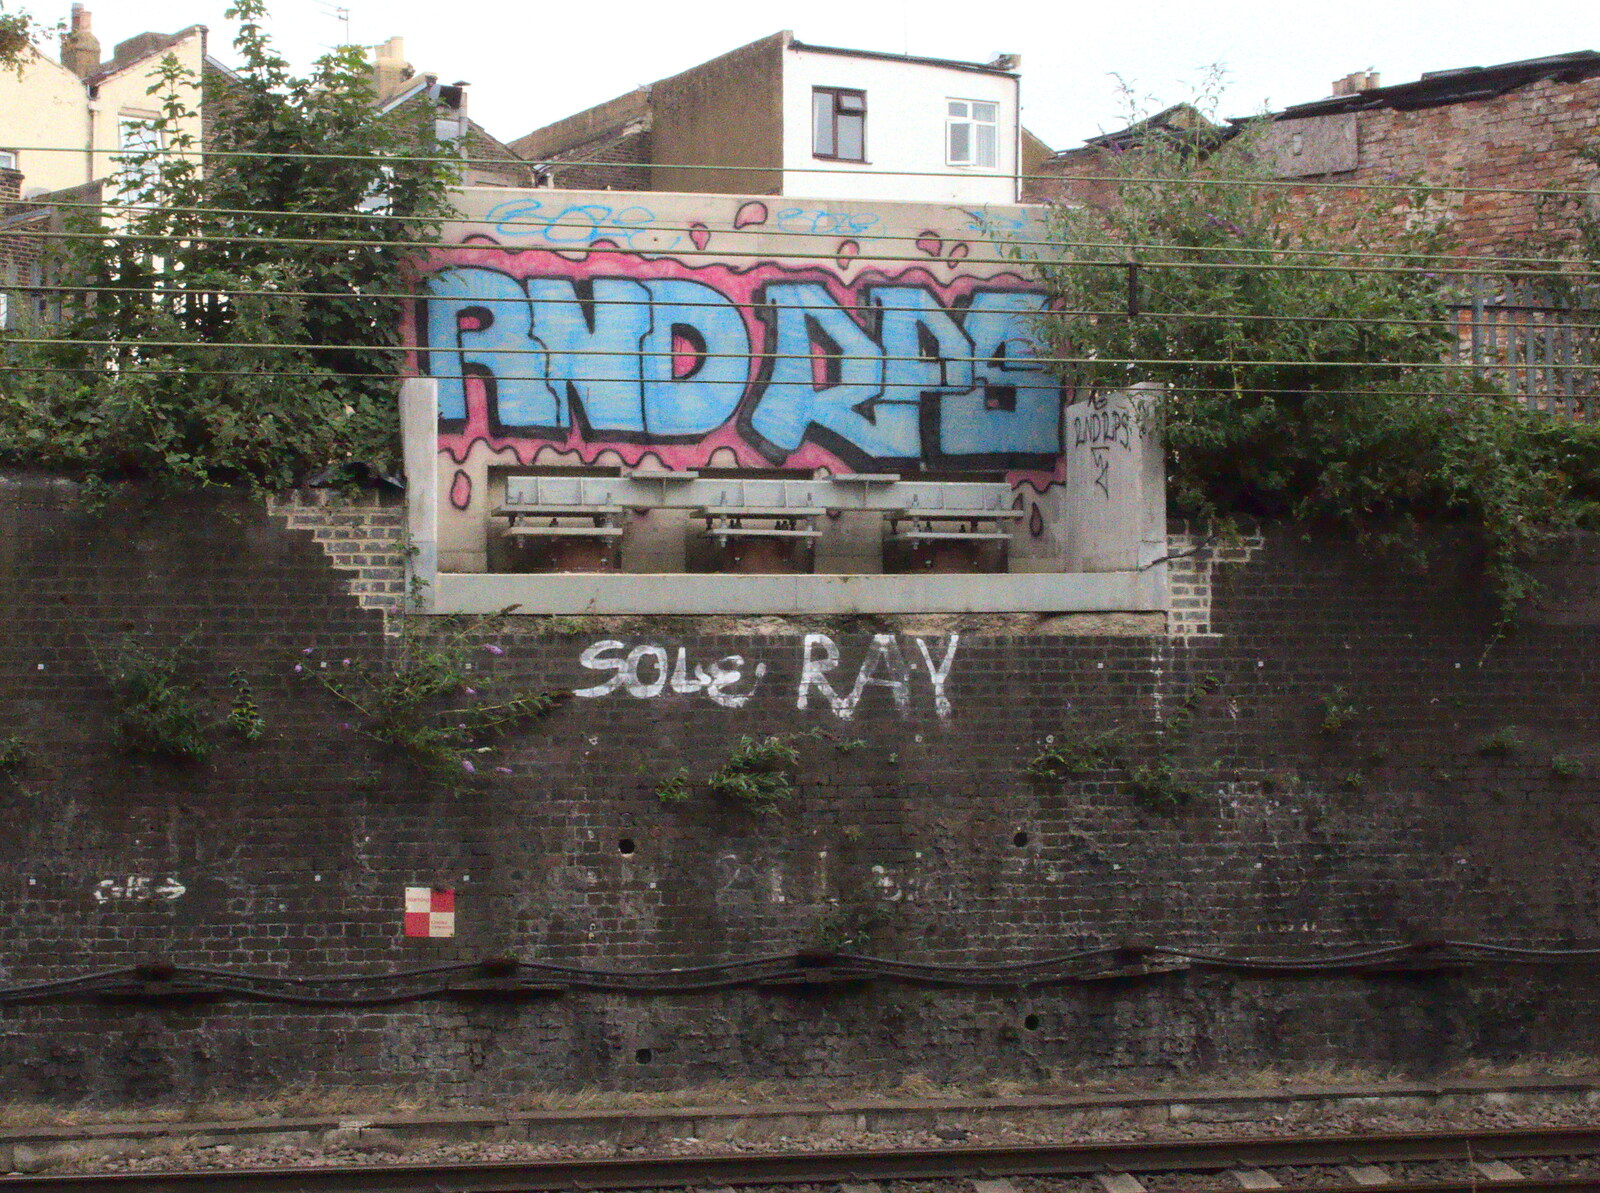 Nice tags on a high-up wall from A Week on the Rails, Stratford and Liverpool Street, London - 23rd July